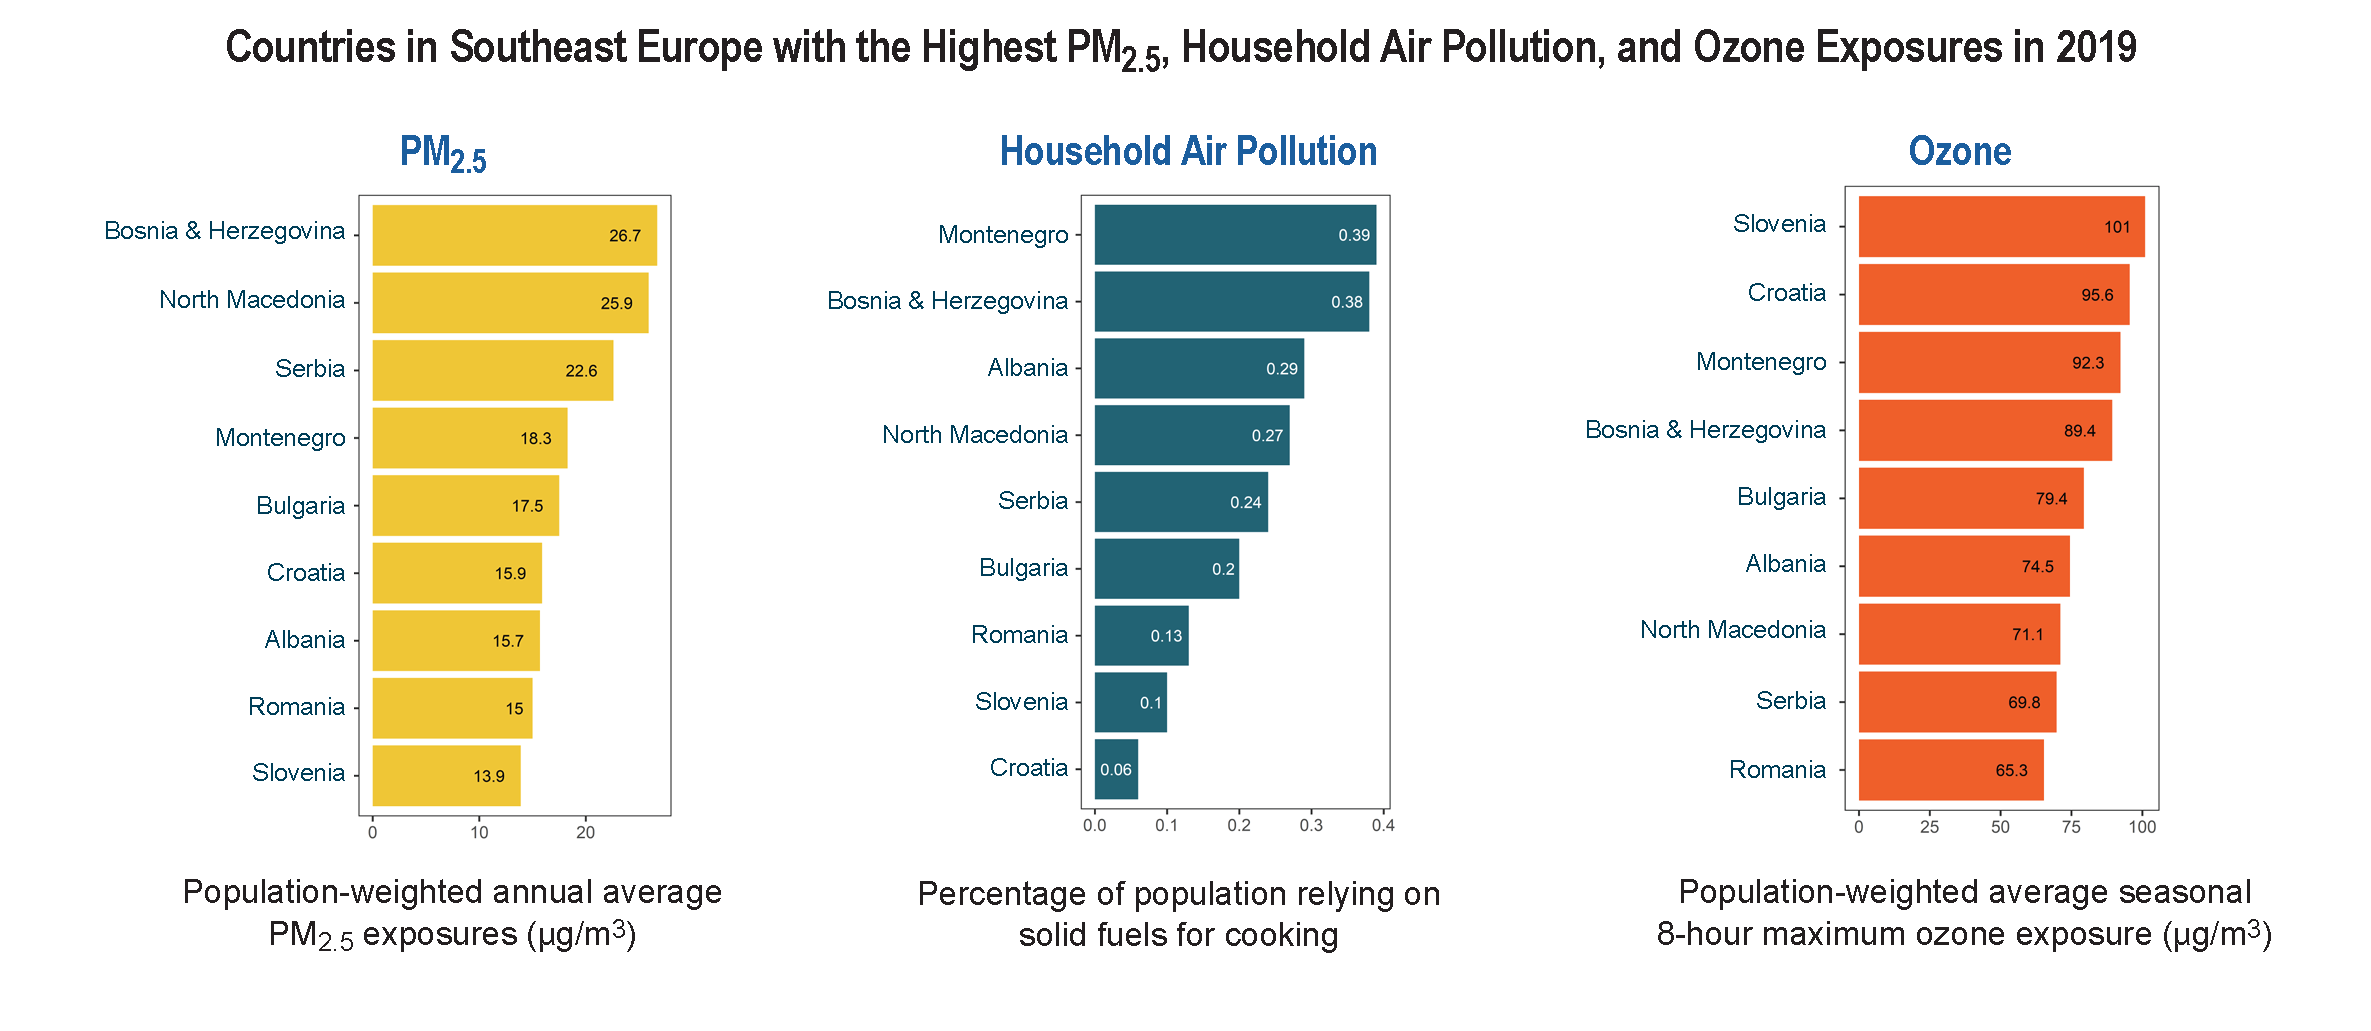 Countries in SE Europe with the highest PM2.5, HAP, and ozone exposure